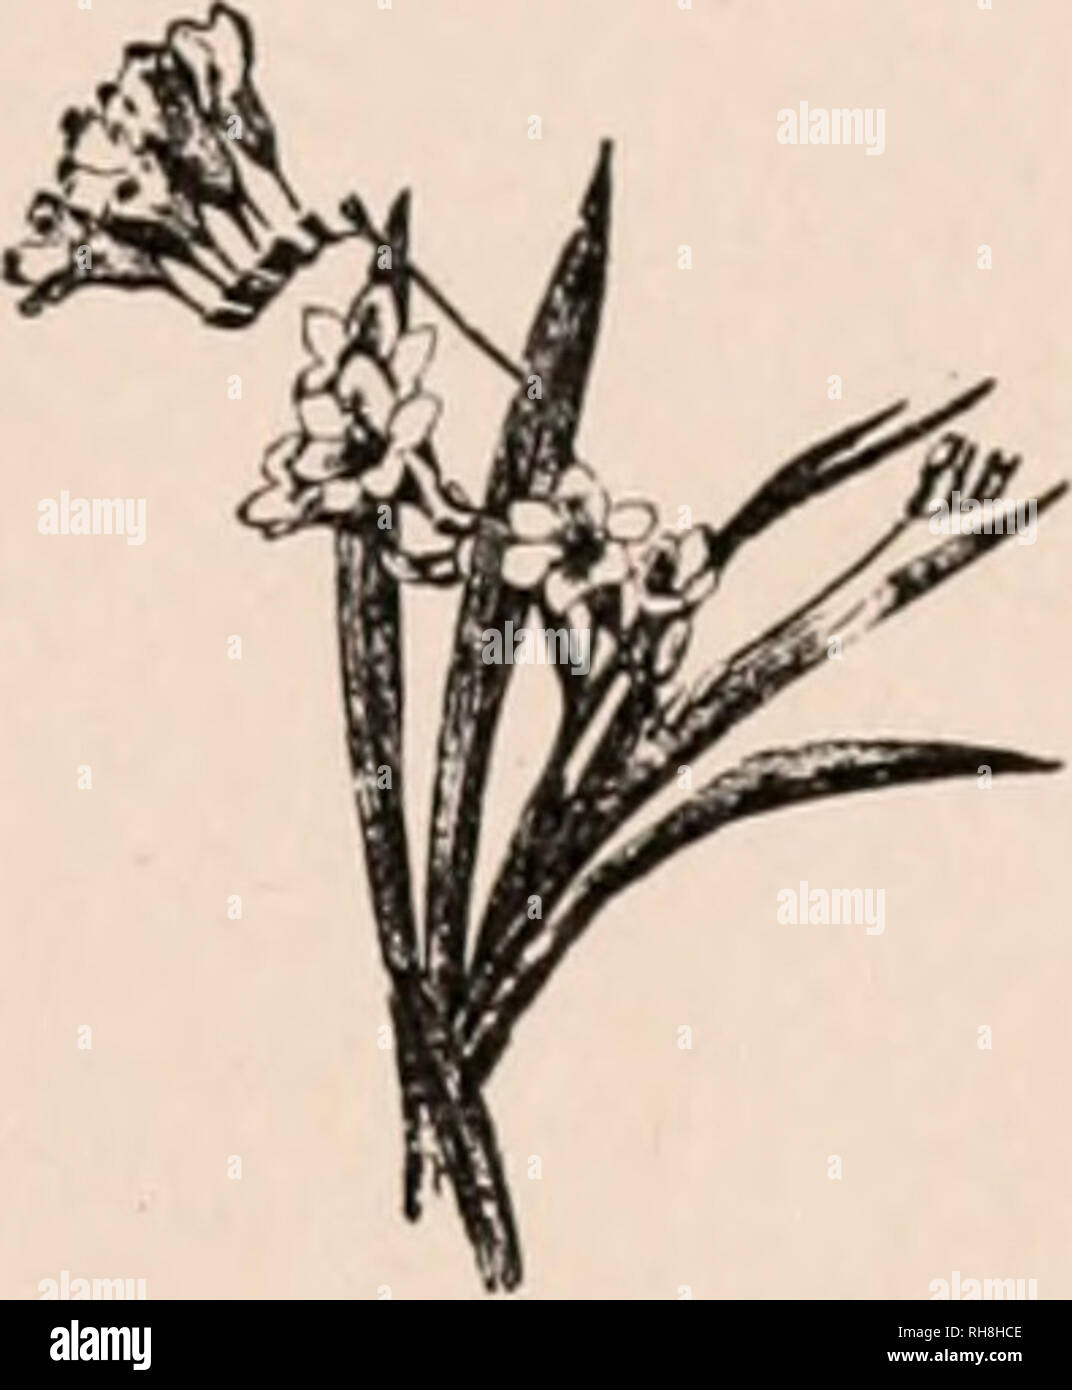 . Botany for secondary schools; a guide to the knowledge of the vegetation of the neighborhood. Plants. IRIS FAMILY 339 winged, often branched: flowers small, usually blue or bluish, soon wither- ing, in terminal 2-5-flowered umbels in a 2-leaved spathe; perianth seg- ments spreading, bristle-pointed: stamens 3, monadelphous; style 1 long; stigmas very slender; ovary 3-celled. S. angustifdlium, Mill. Grassy plants in tufts or clumps: scape 4-12 in., spathe single, sessile: flowers blue to purple, rarely white; petals notched and mucronate. In moist meadows, among grass. Summer. Common. 4. FREf Stock Photo